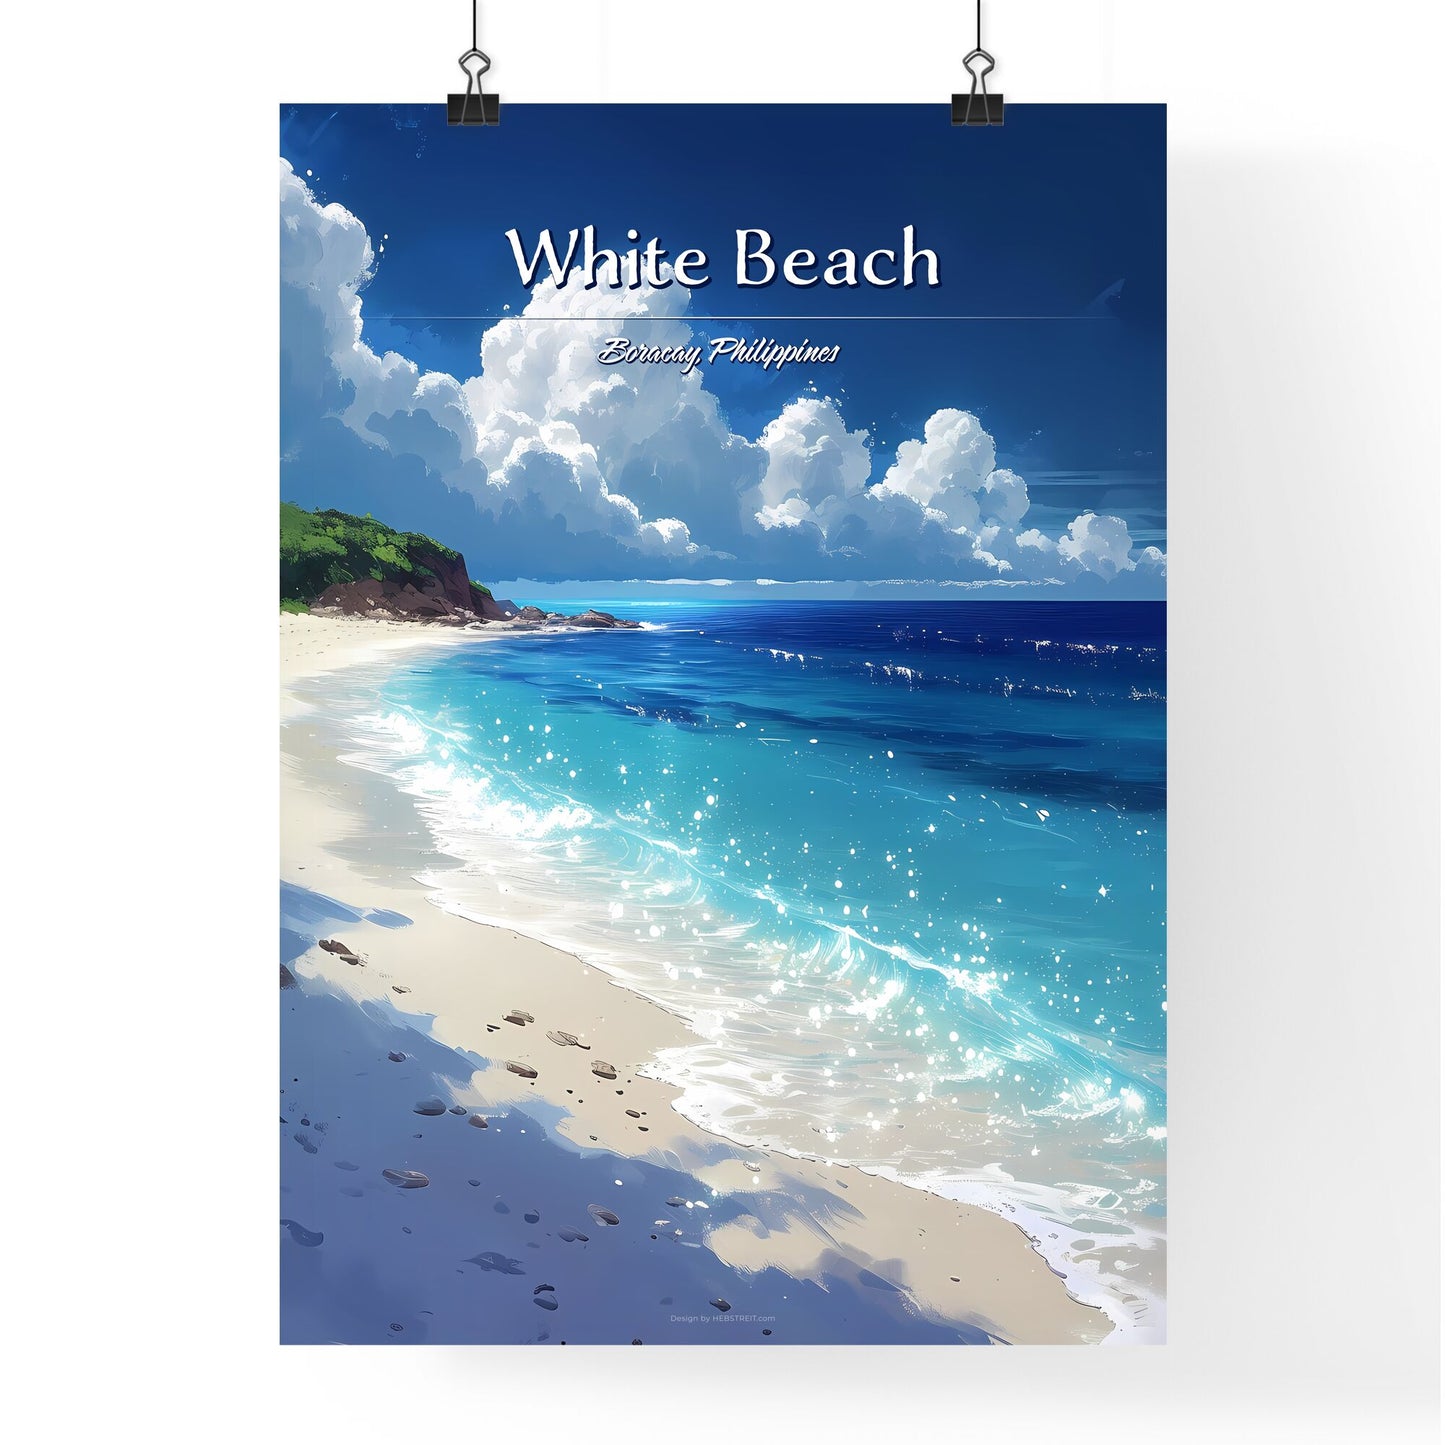 White Beach (Boracay) - Art print of a beach with blue water and clouds Default Title